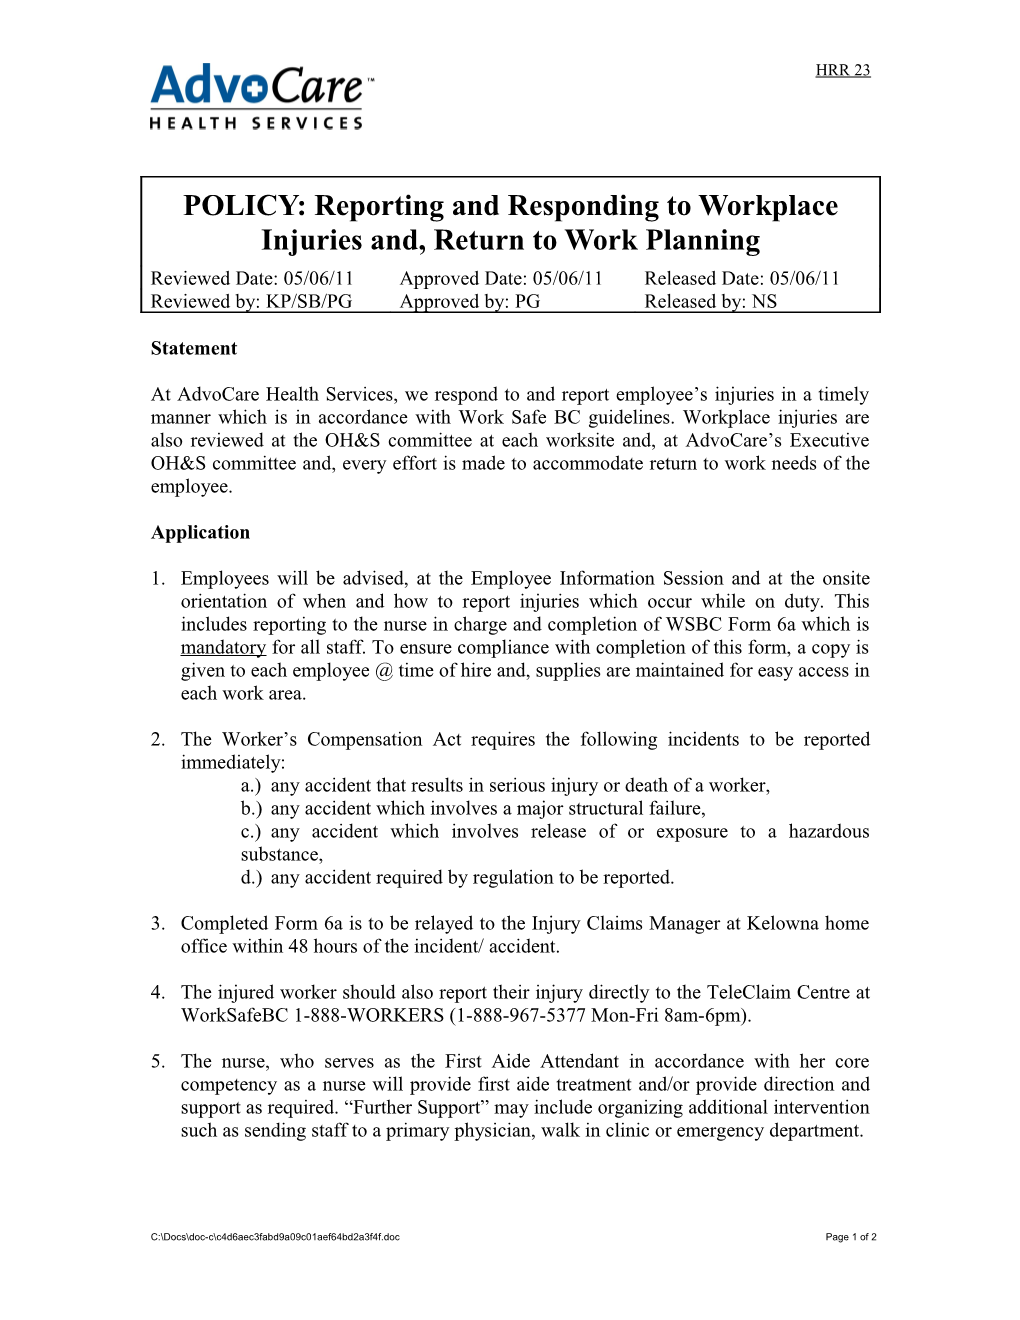 POLICY: Reporting Workplace Injuries